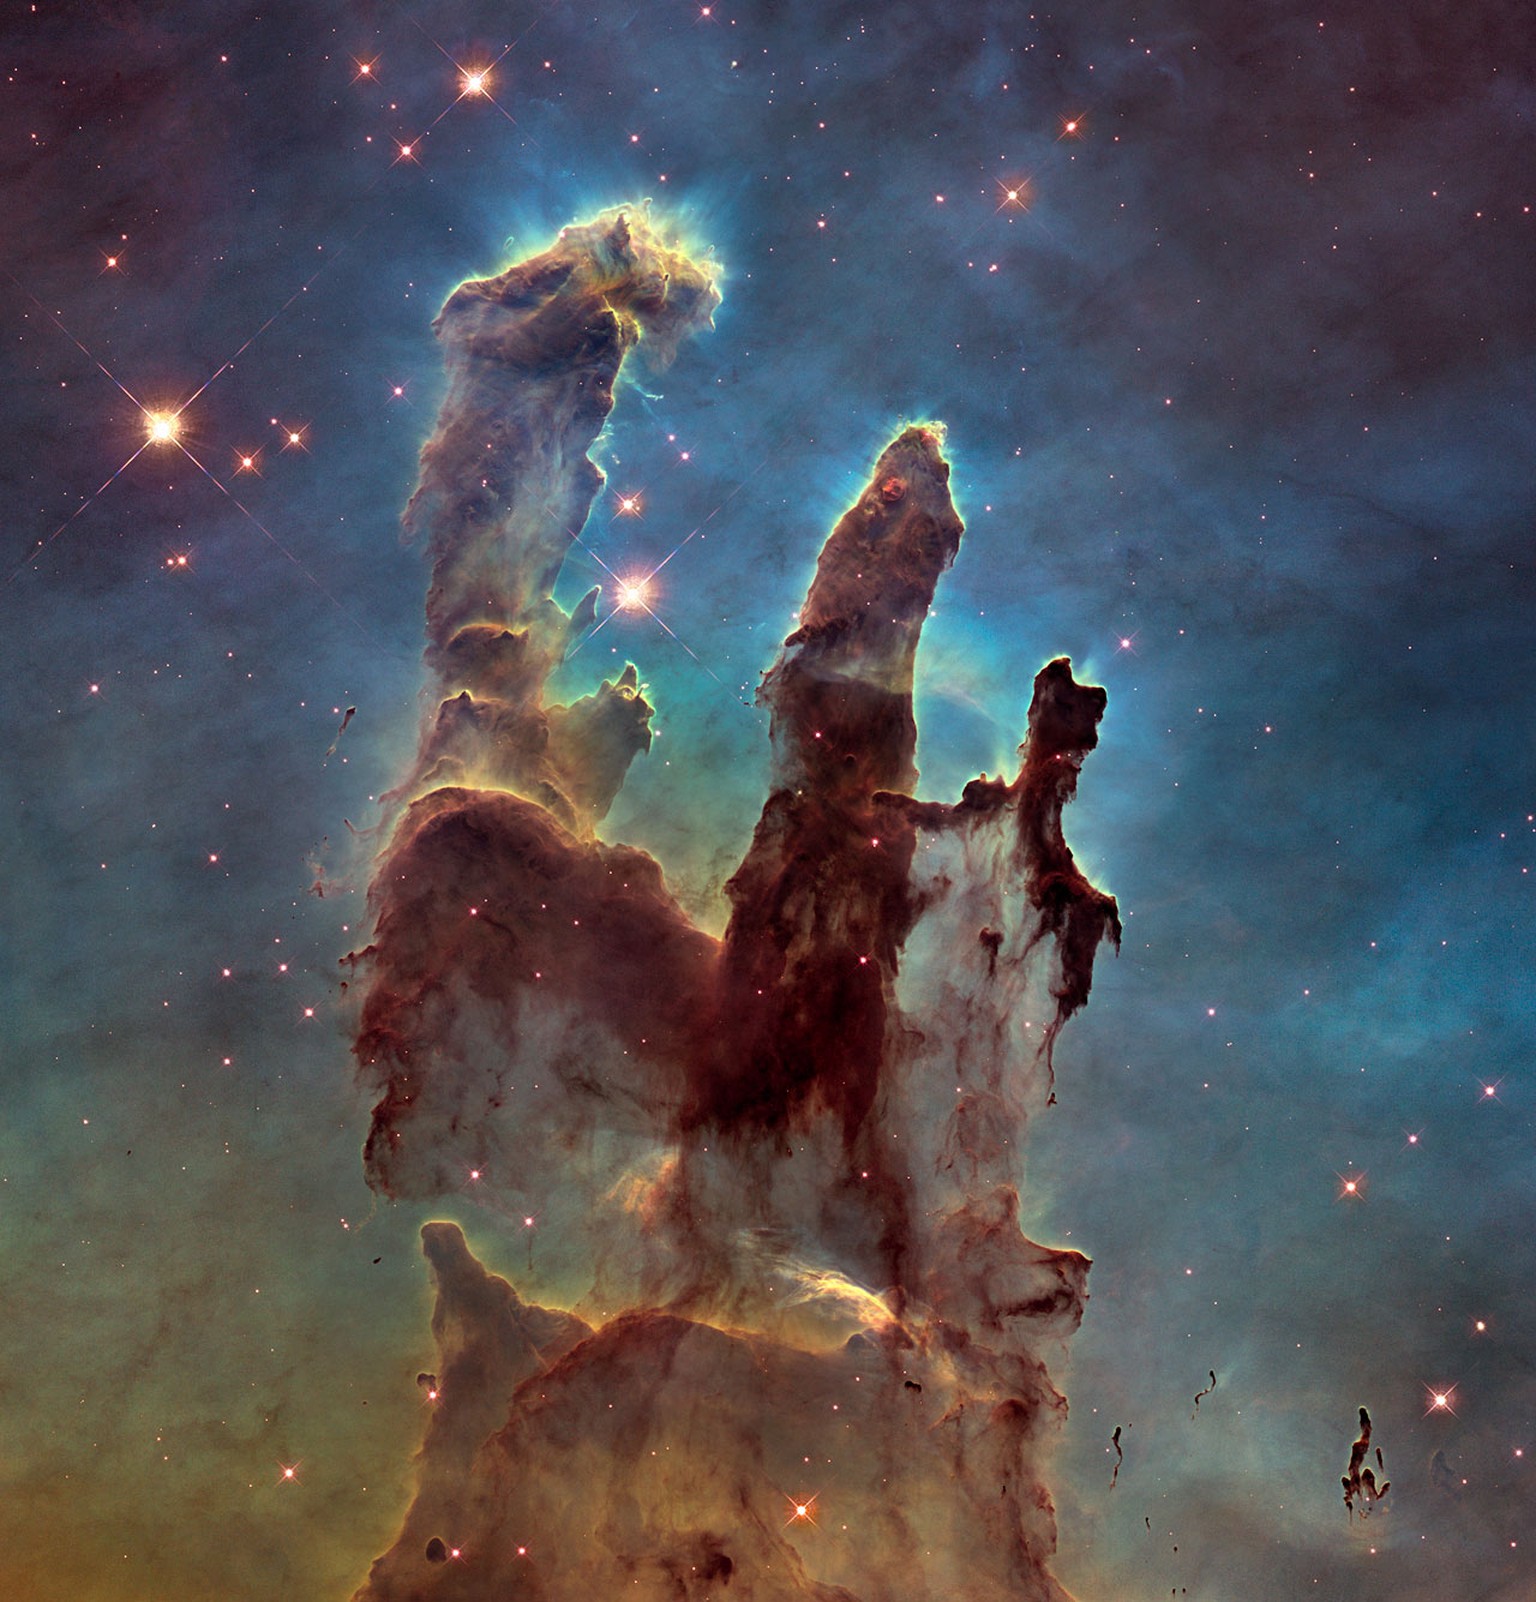 The NASA/ESA Hubble Space Telescope has revisited one of its most iconic and popular images: the Eagle Nebula’s Pillars of Creation. This image shows the pillars as seen in visible light, capturing th ...